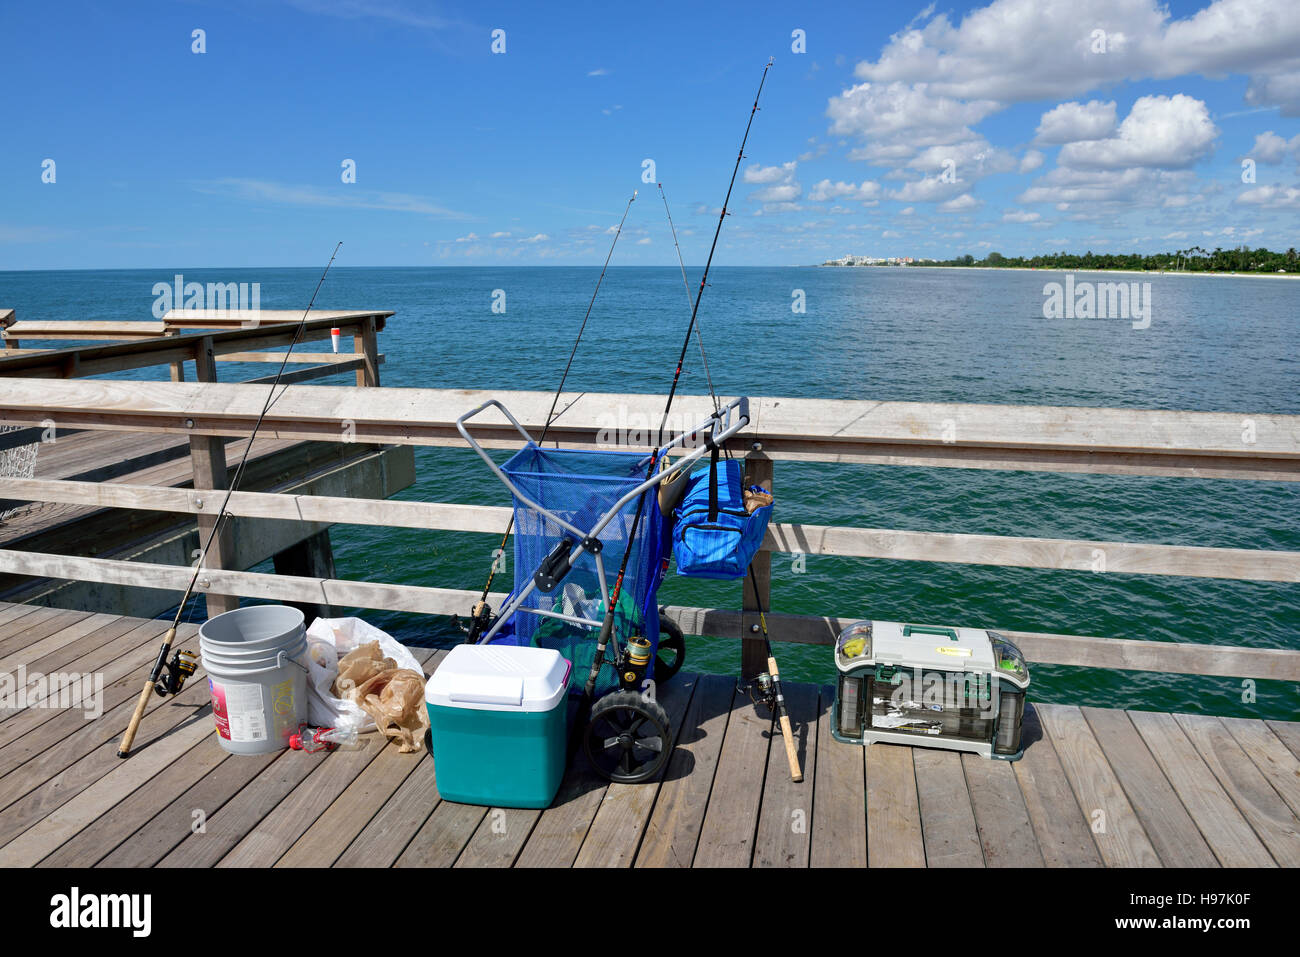 Sea fishing tackle, rods, reels leaning against railing on side of